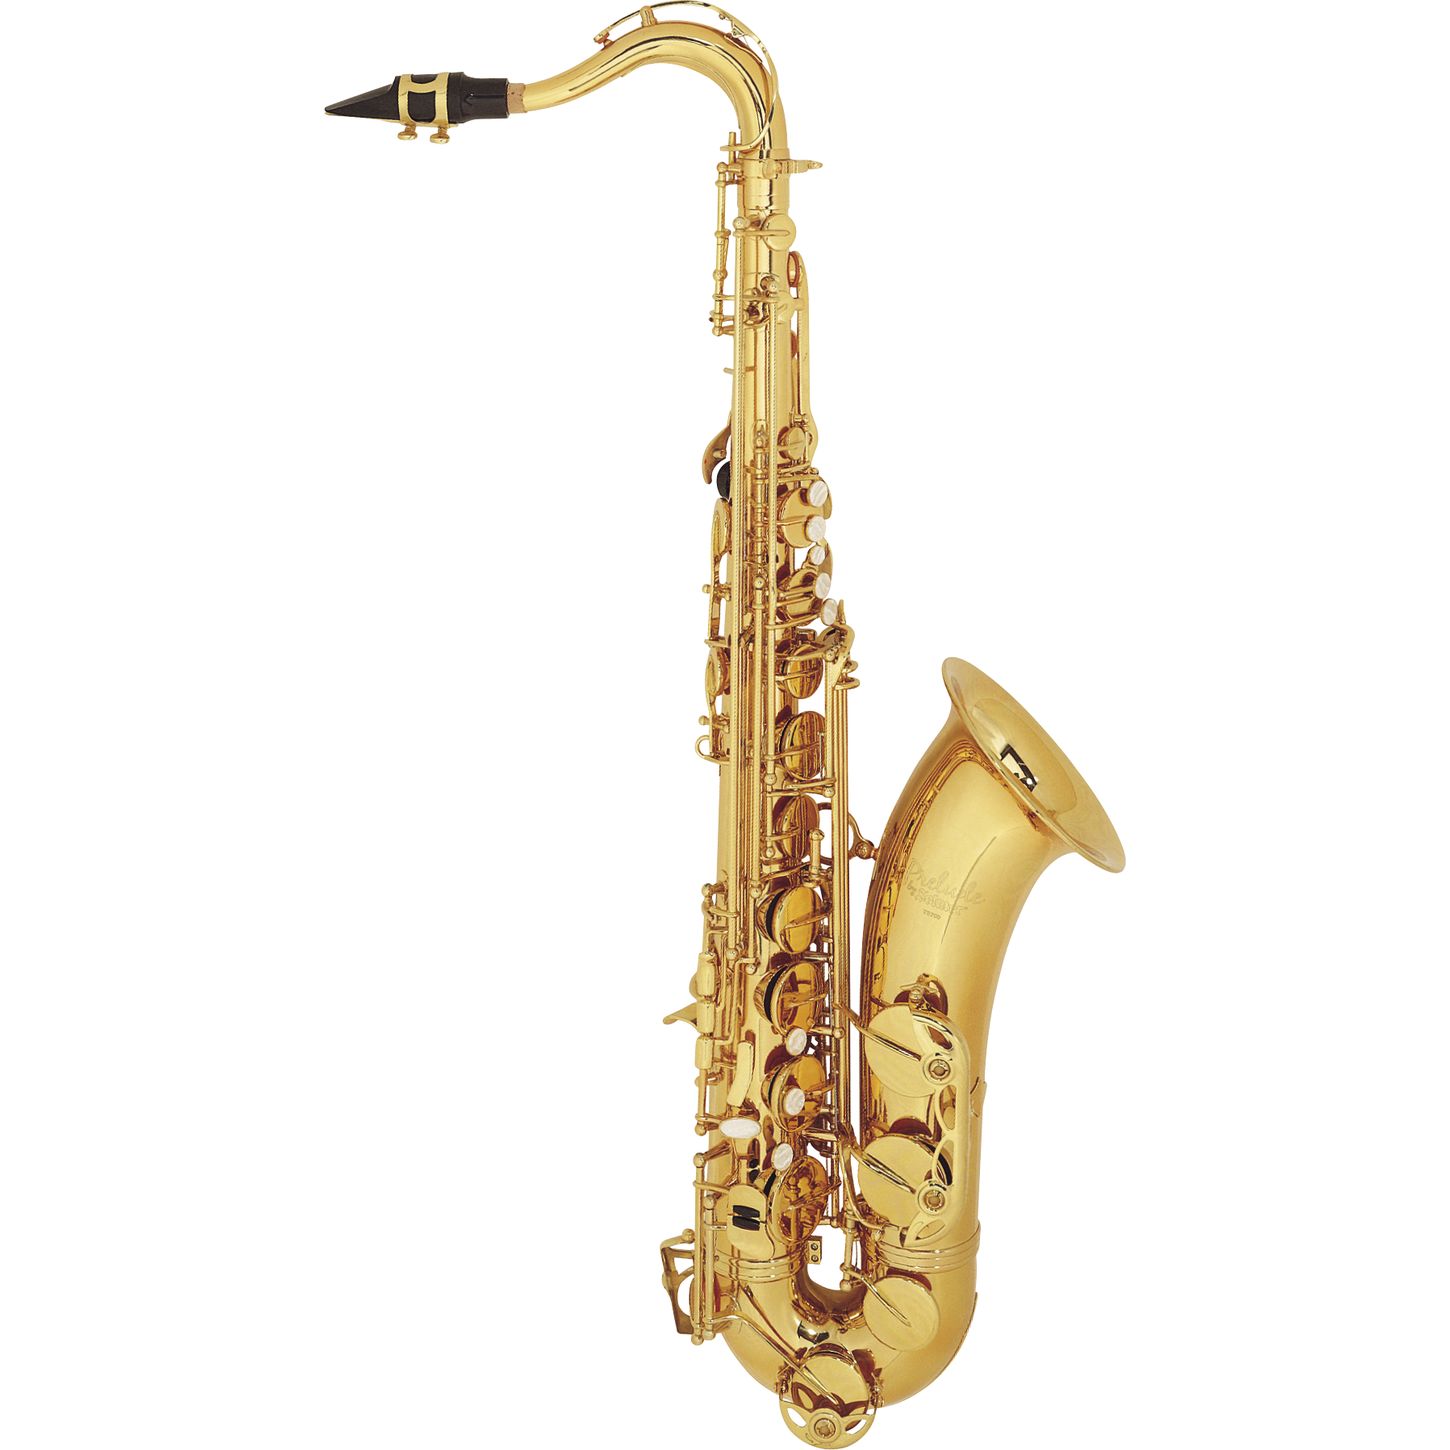 Tenor Saxophone Photo Picture Image And Wallpaper